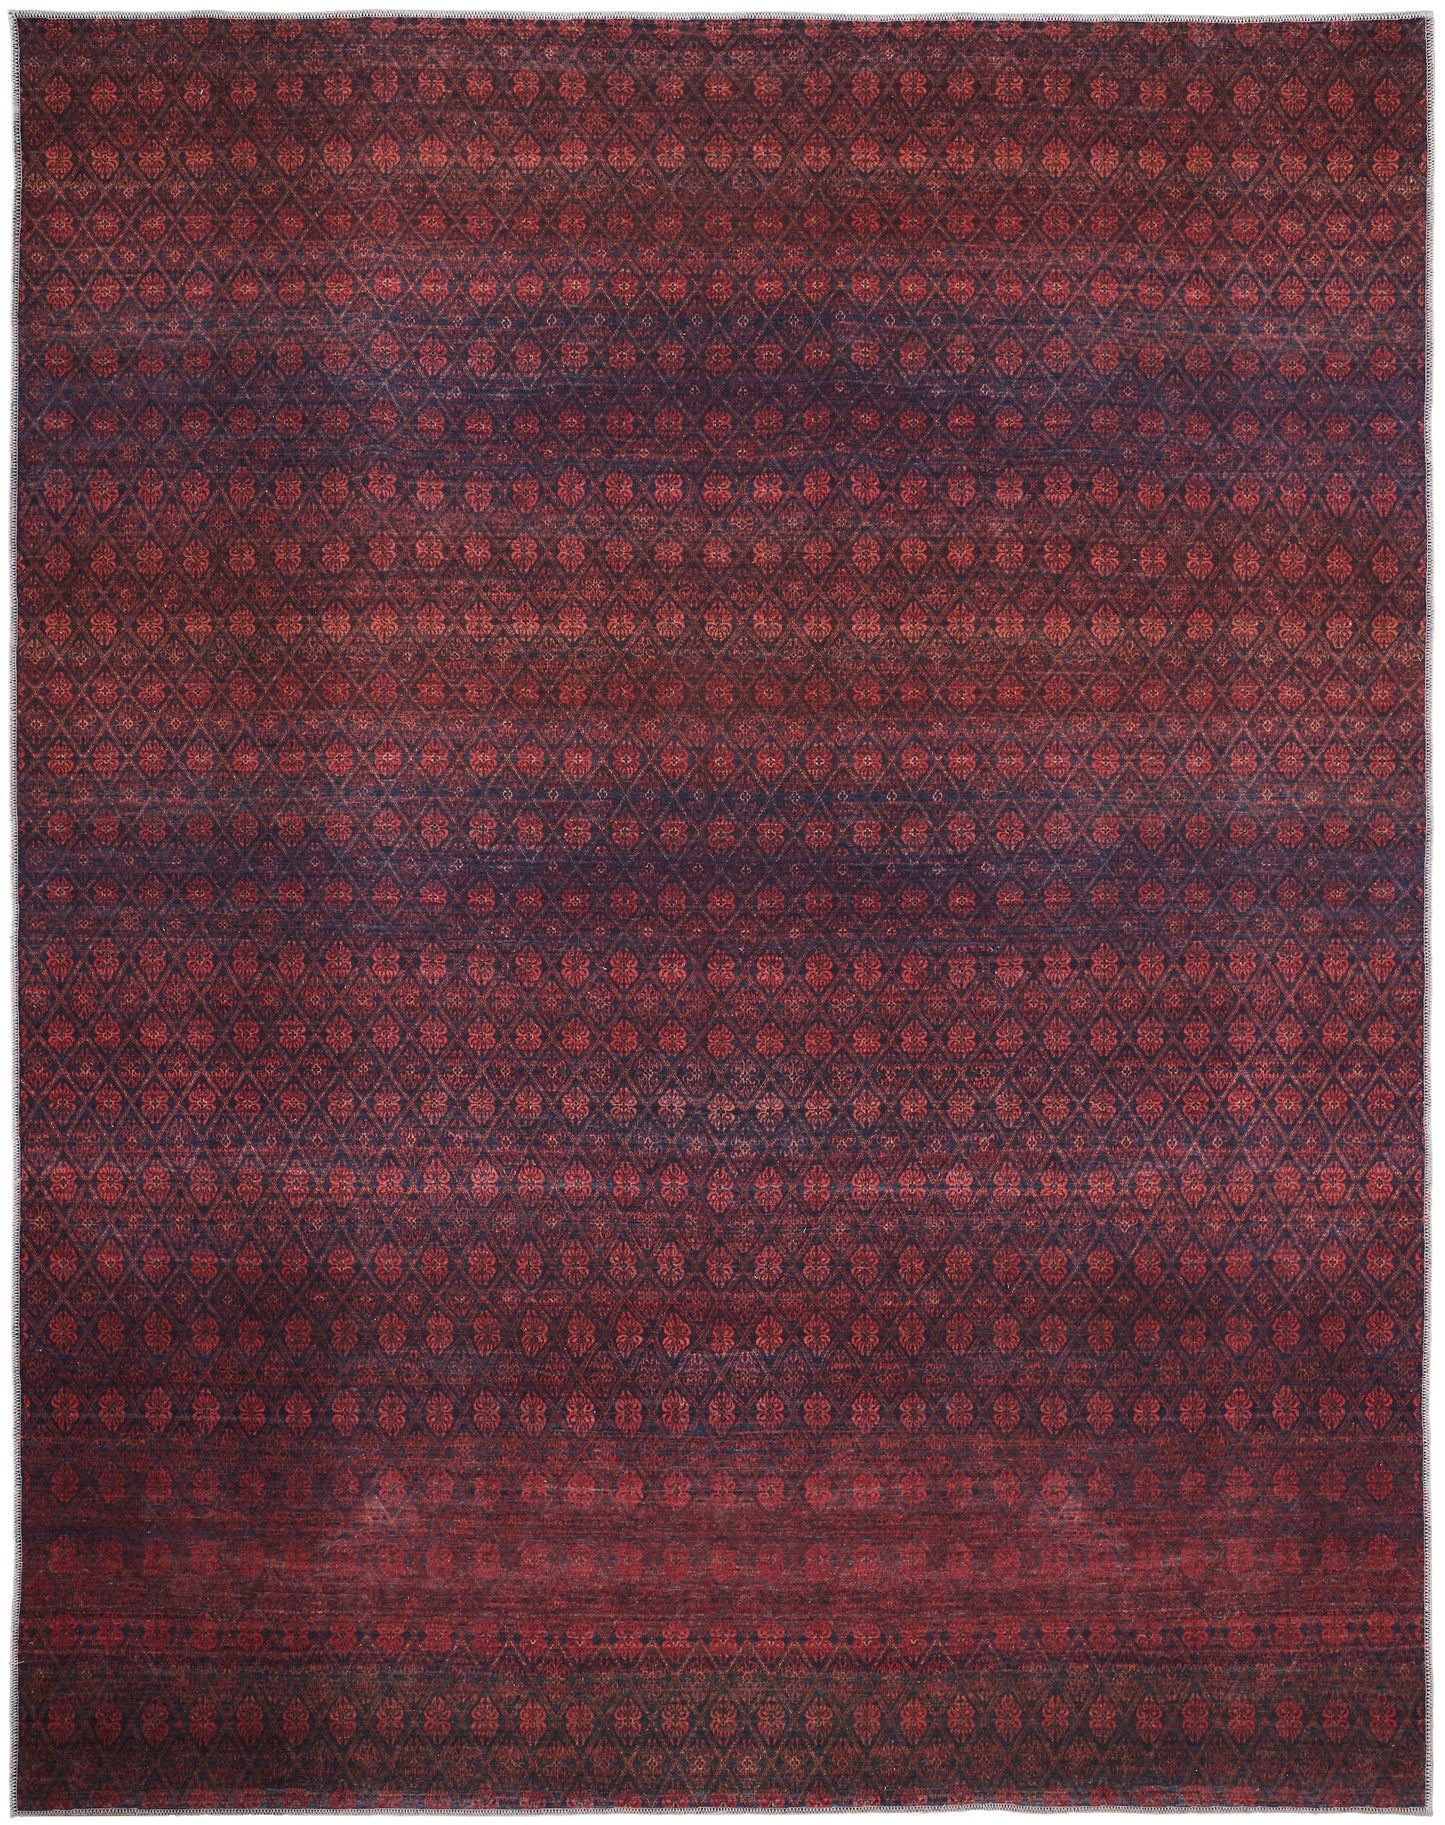 Voss 39HAF Power Loomed Synthetic Blend Indoor Area Rug by Feizy Rugs